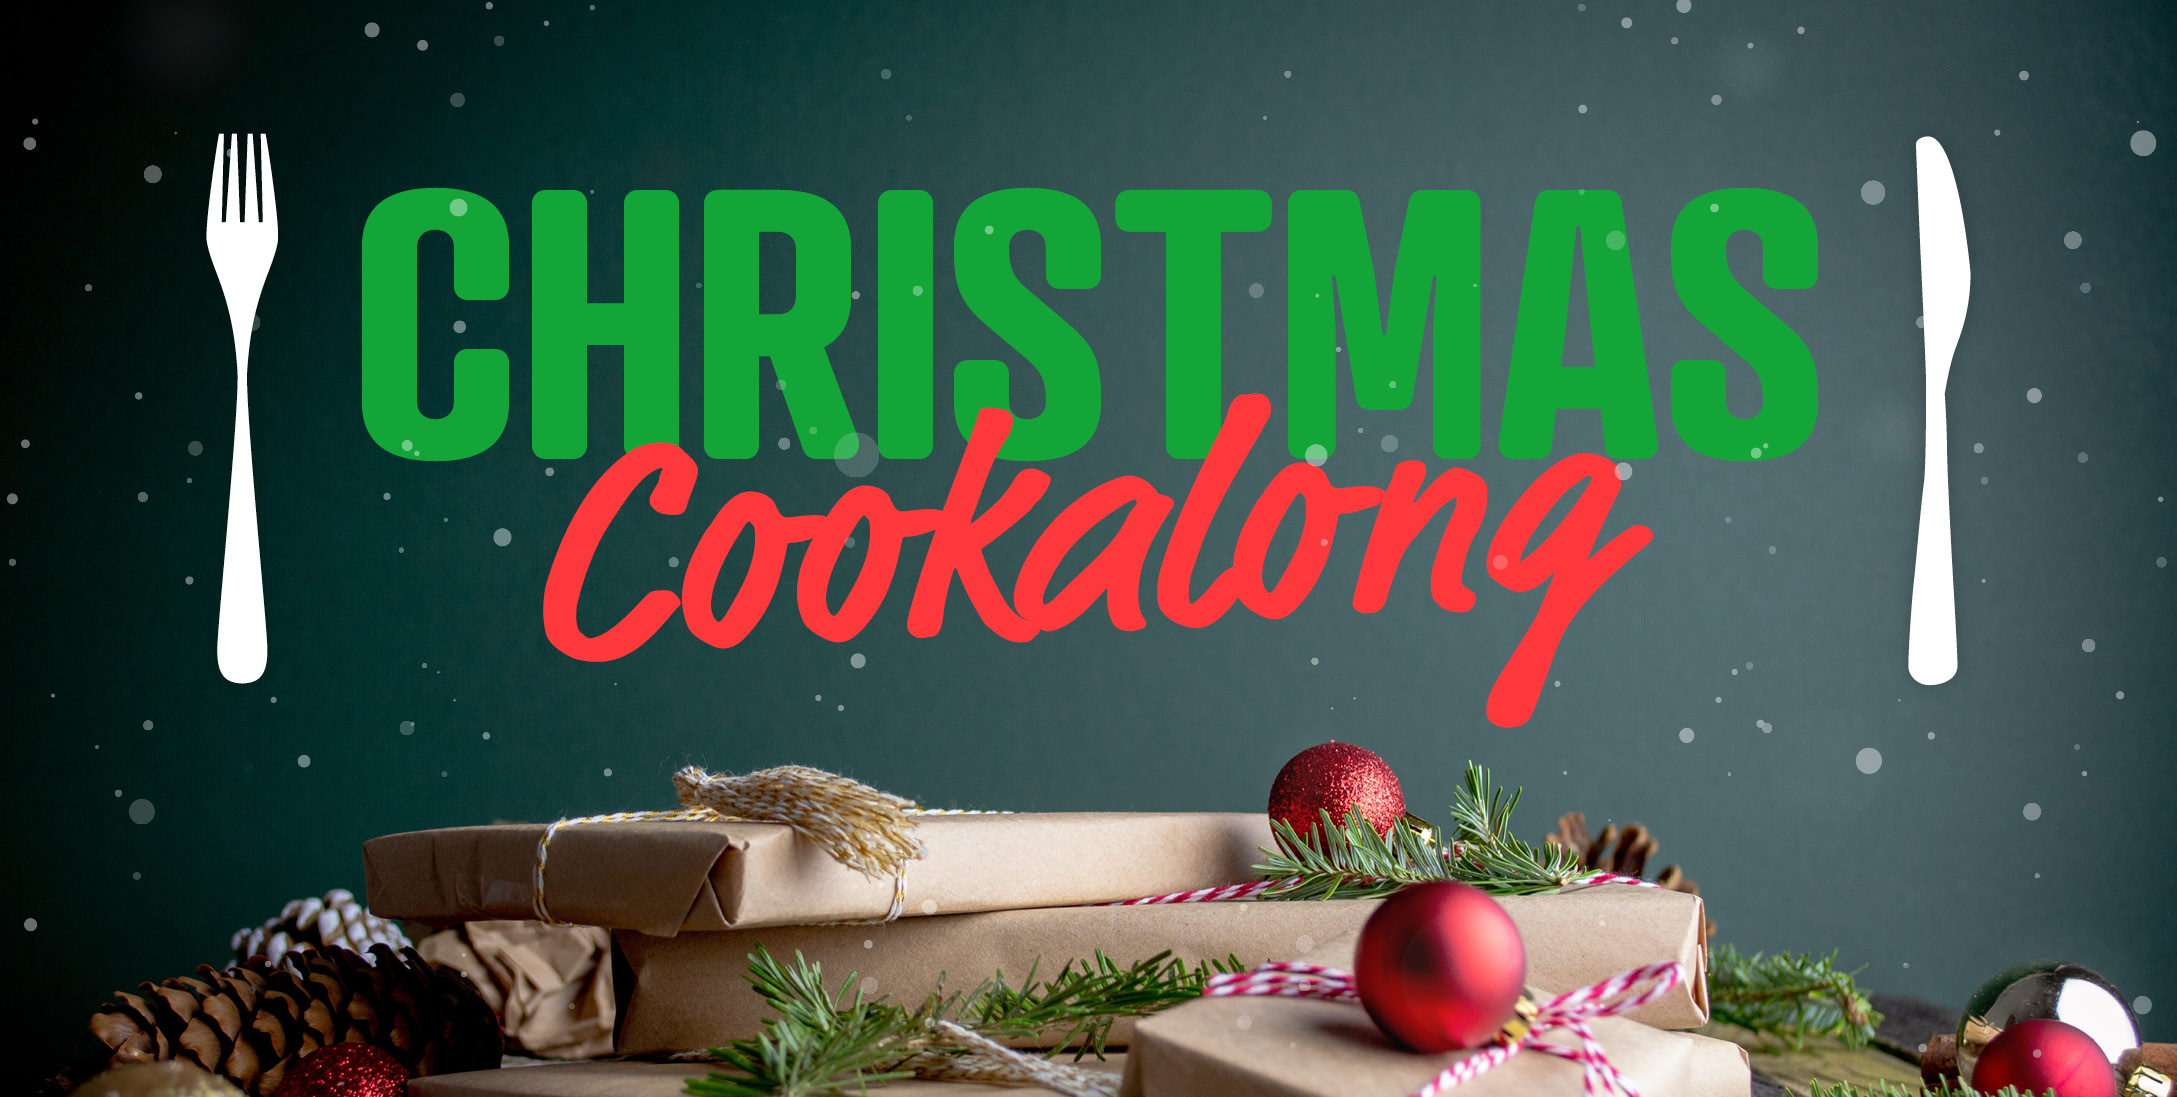 A stack of presents with festive decorations, a knife and fork, and text that reads 'Christmas Cookalong'.